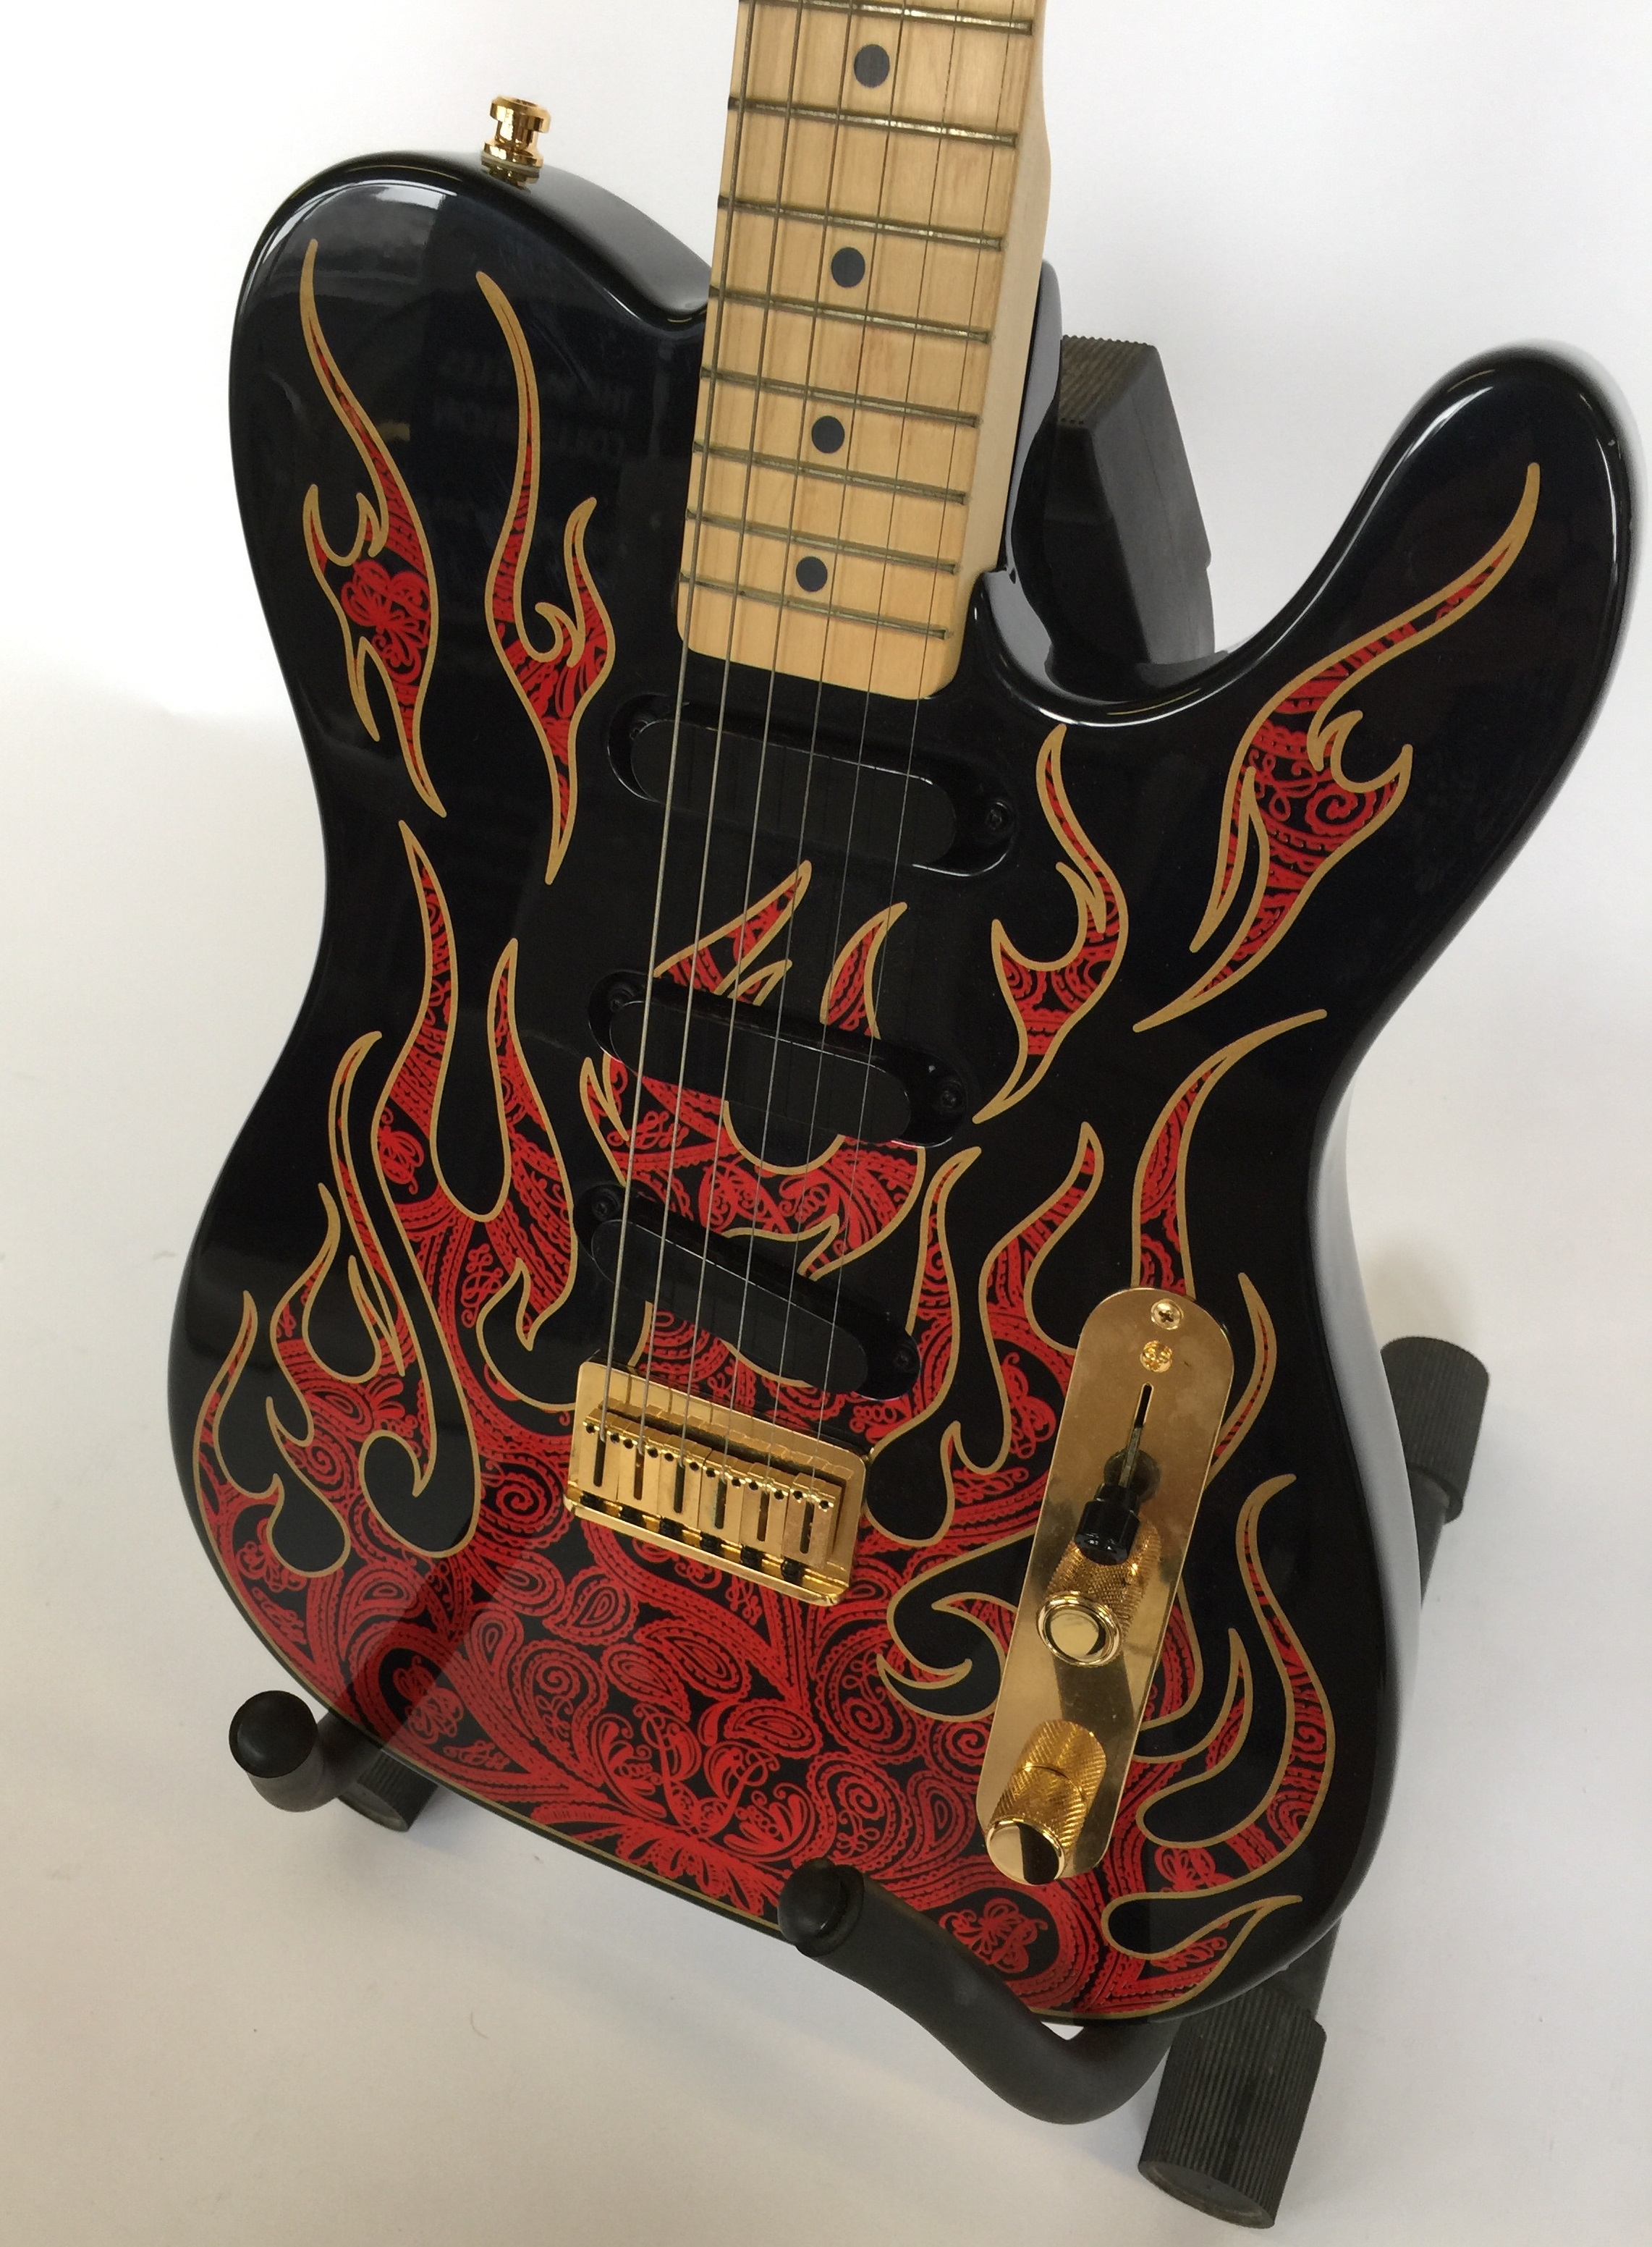 FENDER TELECASTER FLAME JAMES BURTON 1994 - limited artist edition that was gifted to Jerry Donahue - Image 2 of 7